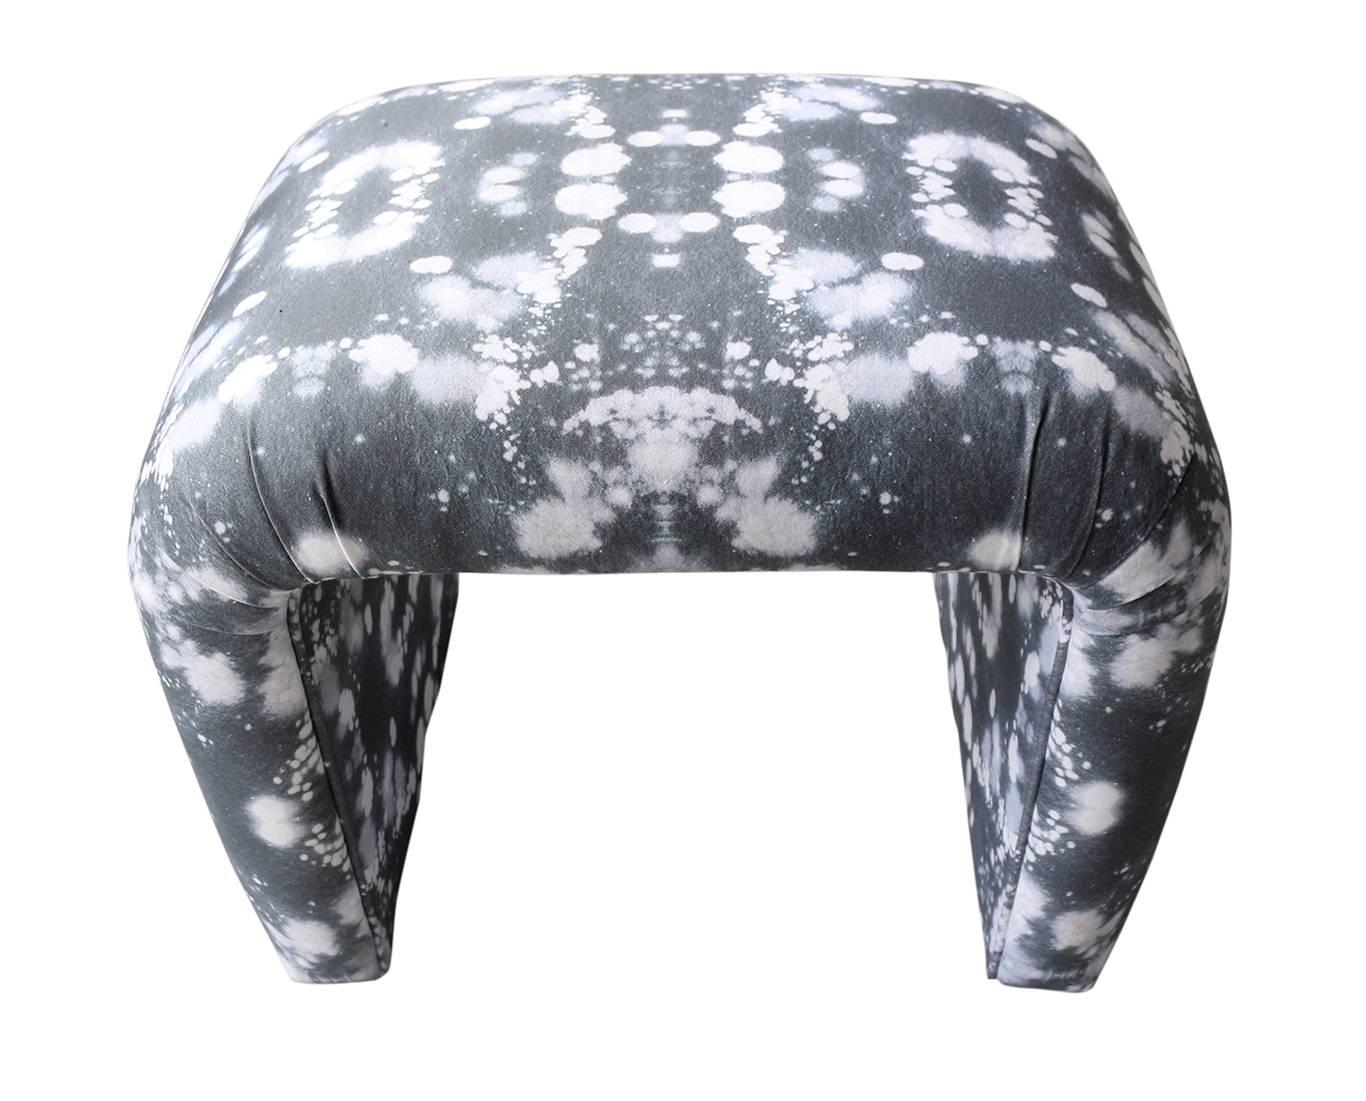 Custom waterfall bench made in collaboration with Chairloom.
Pattern: Solar – Beryl
Fabric: Organic cotton denim fabric printed with water based pigment ink.
Dimensions: 23